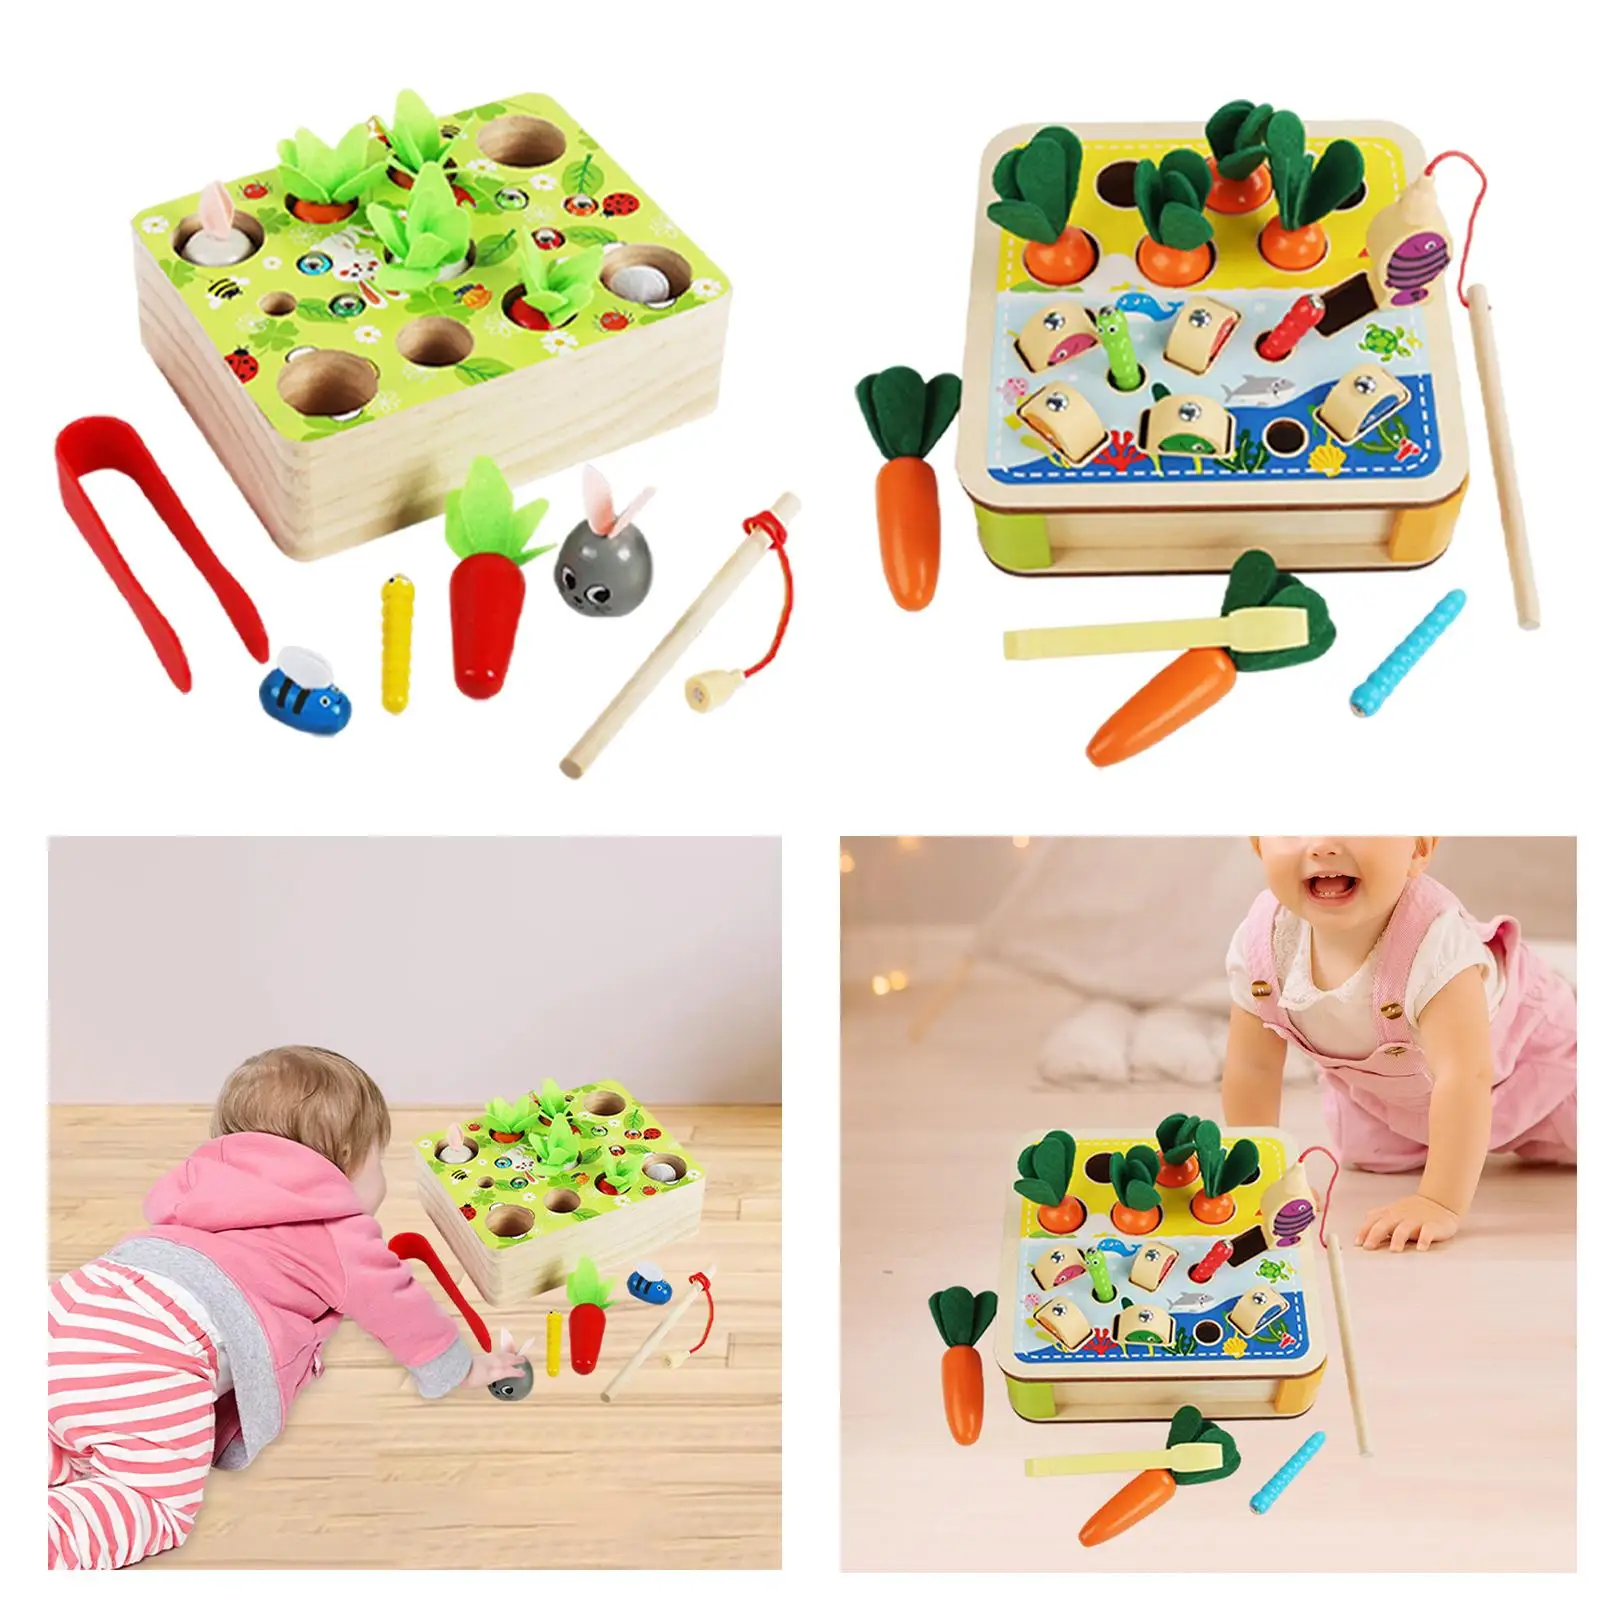 Wooden Pulling Radish Toys Interactive Toys Preschool Learning Toys Education Matching Game for Toddler Baby Holiday Gifts